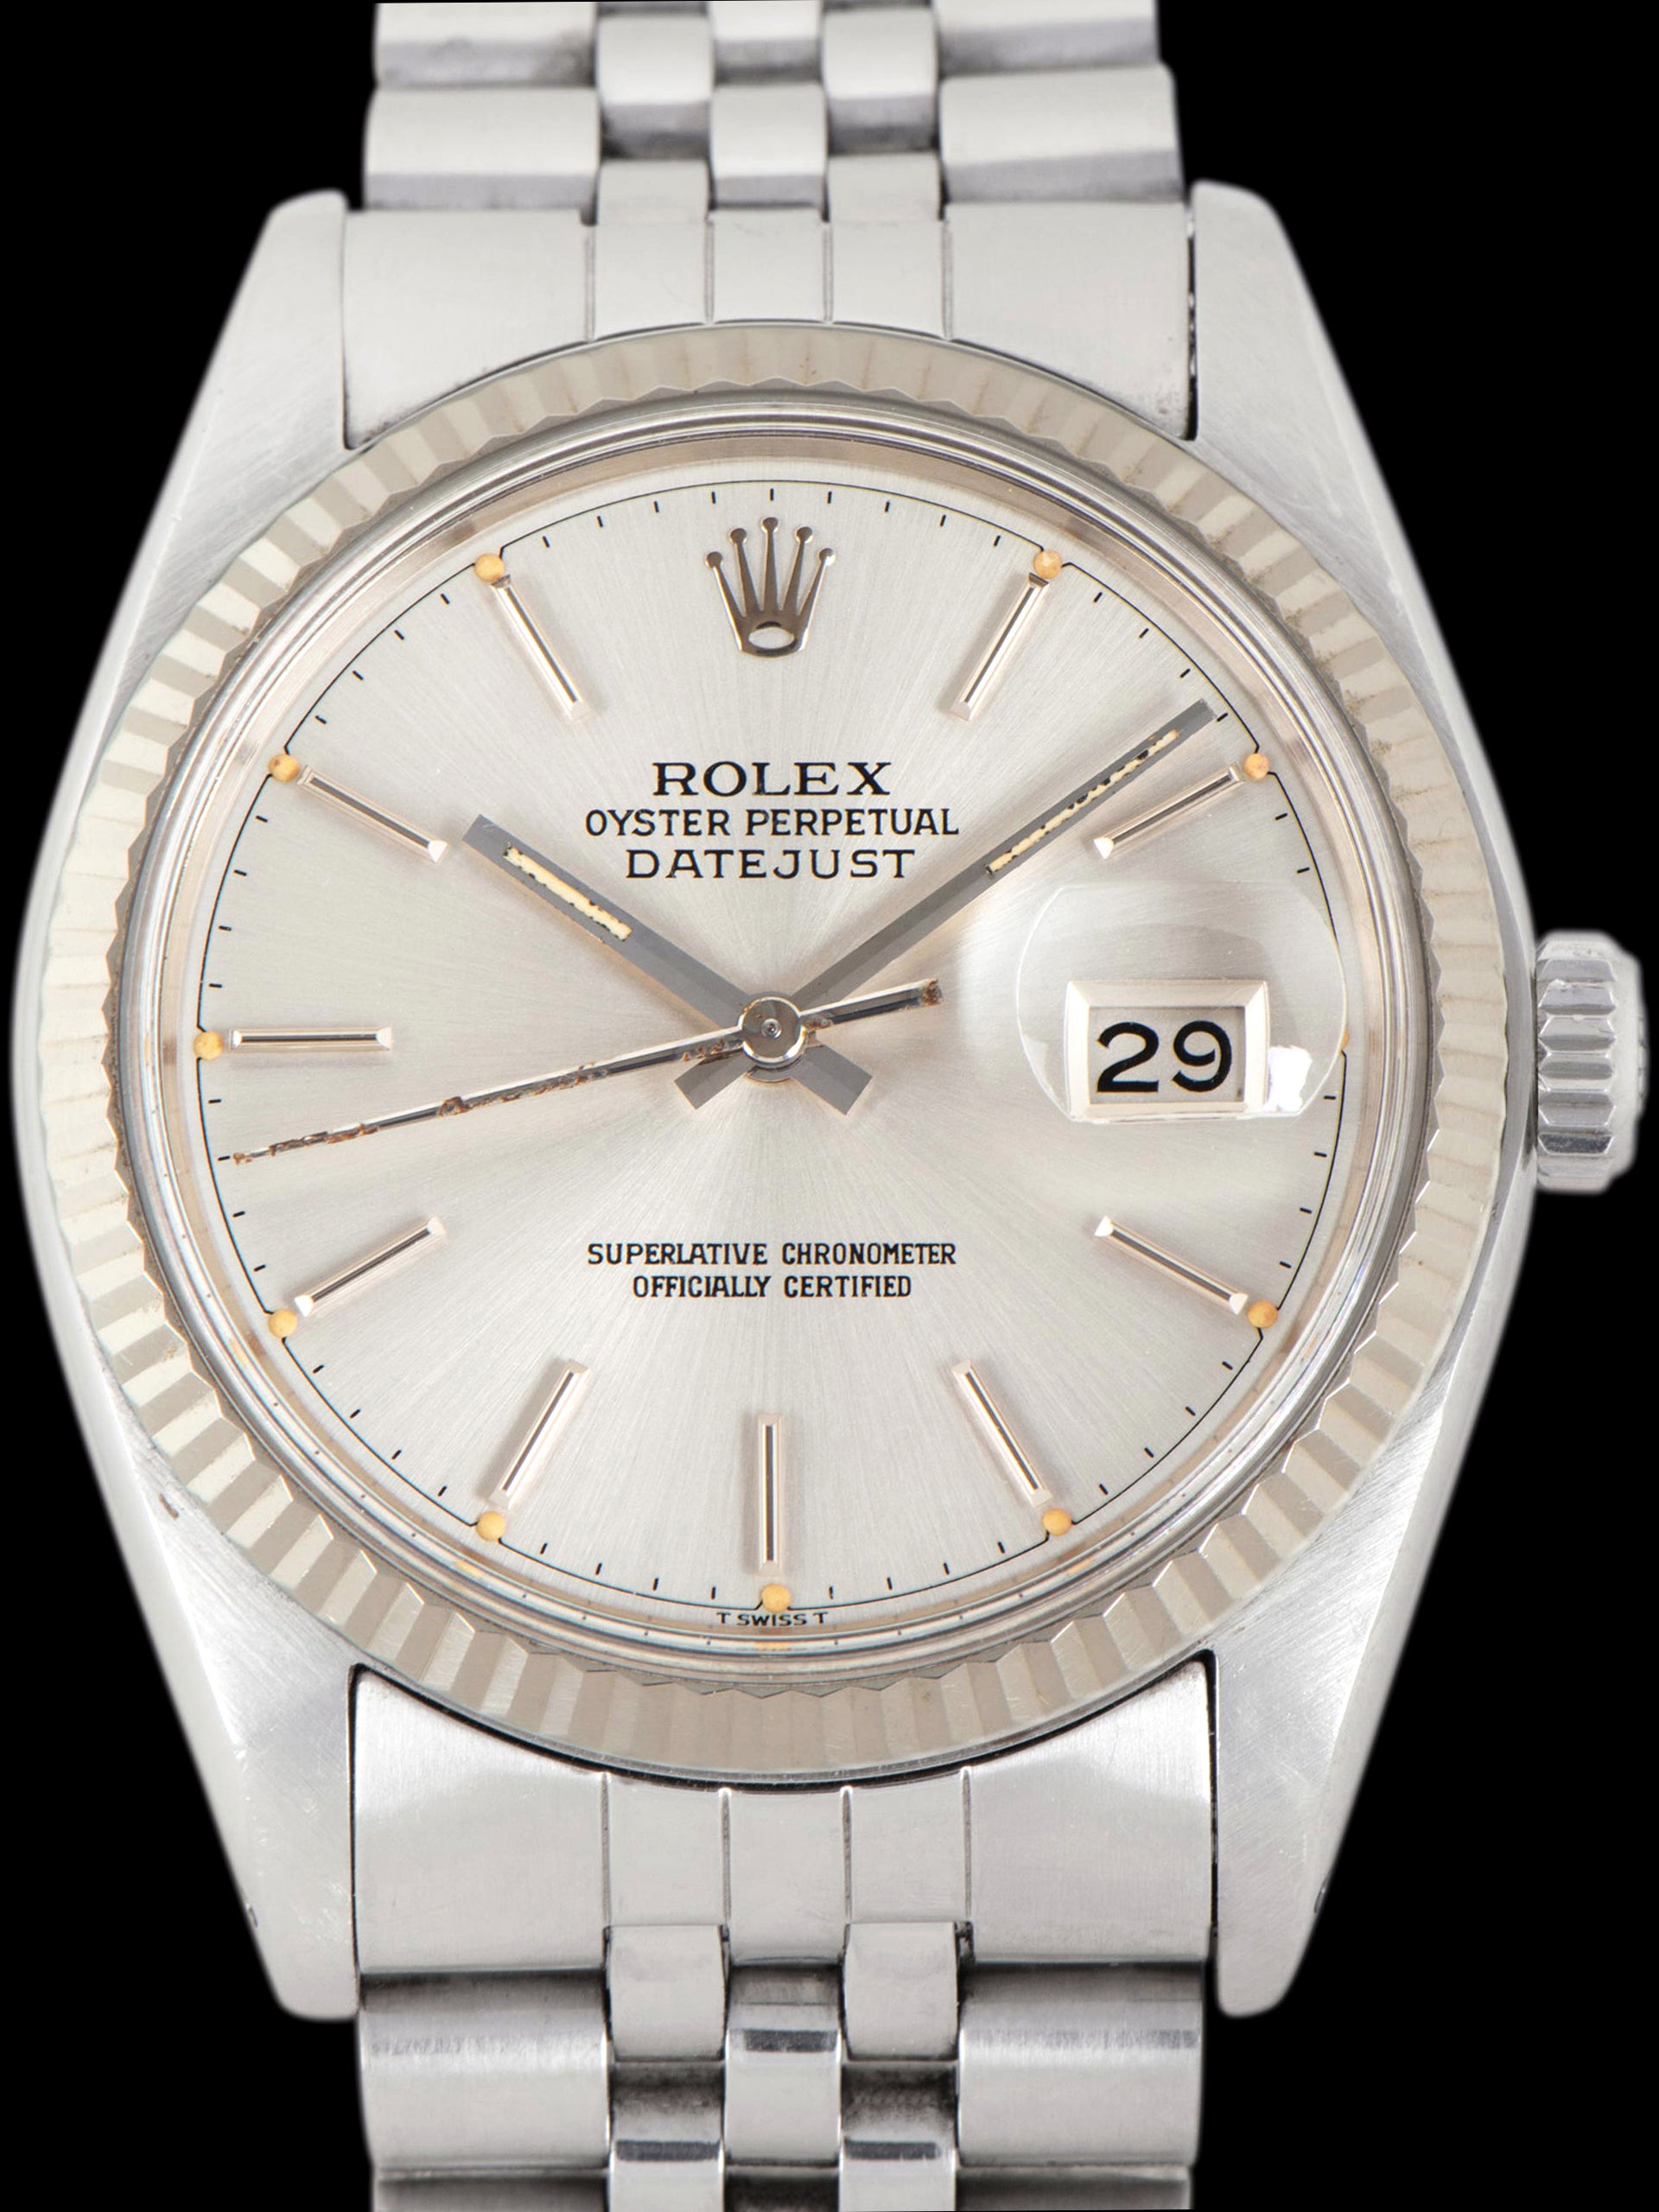 1979 Rolex Datejust (Ref. 16014) Silver "Chapter Ring" Dial